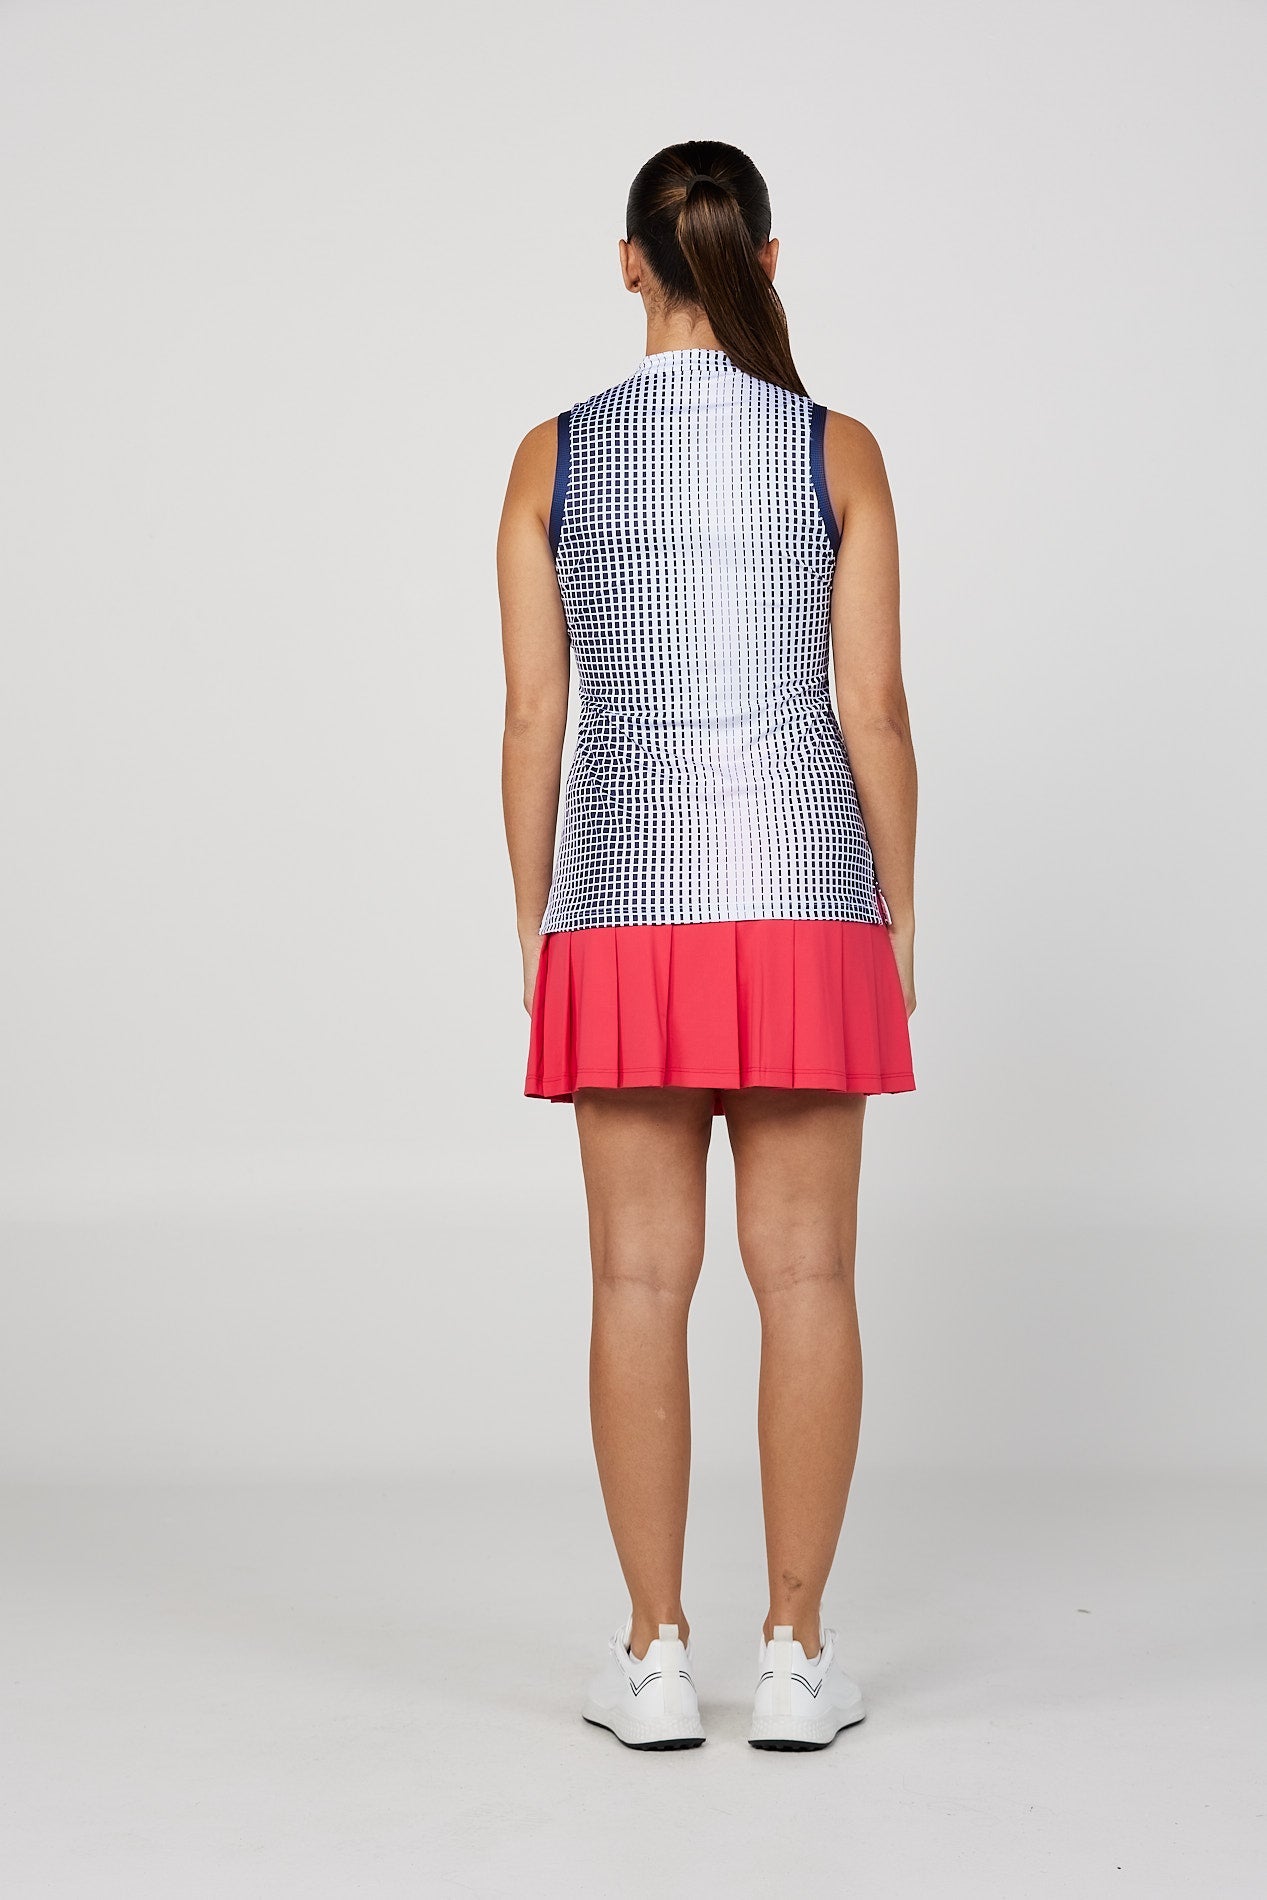 Women's Ombre Grid Navy and White Golf Sleeveless Top by Sofibella, back view